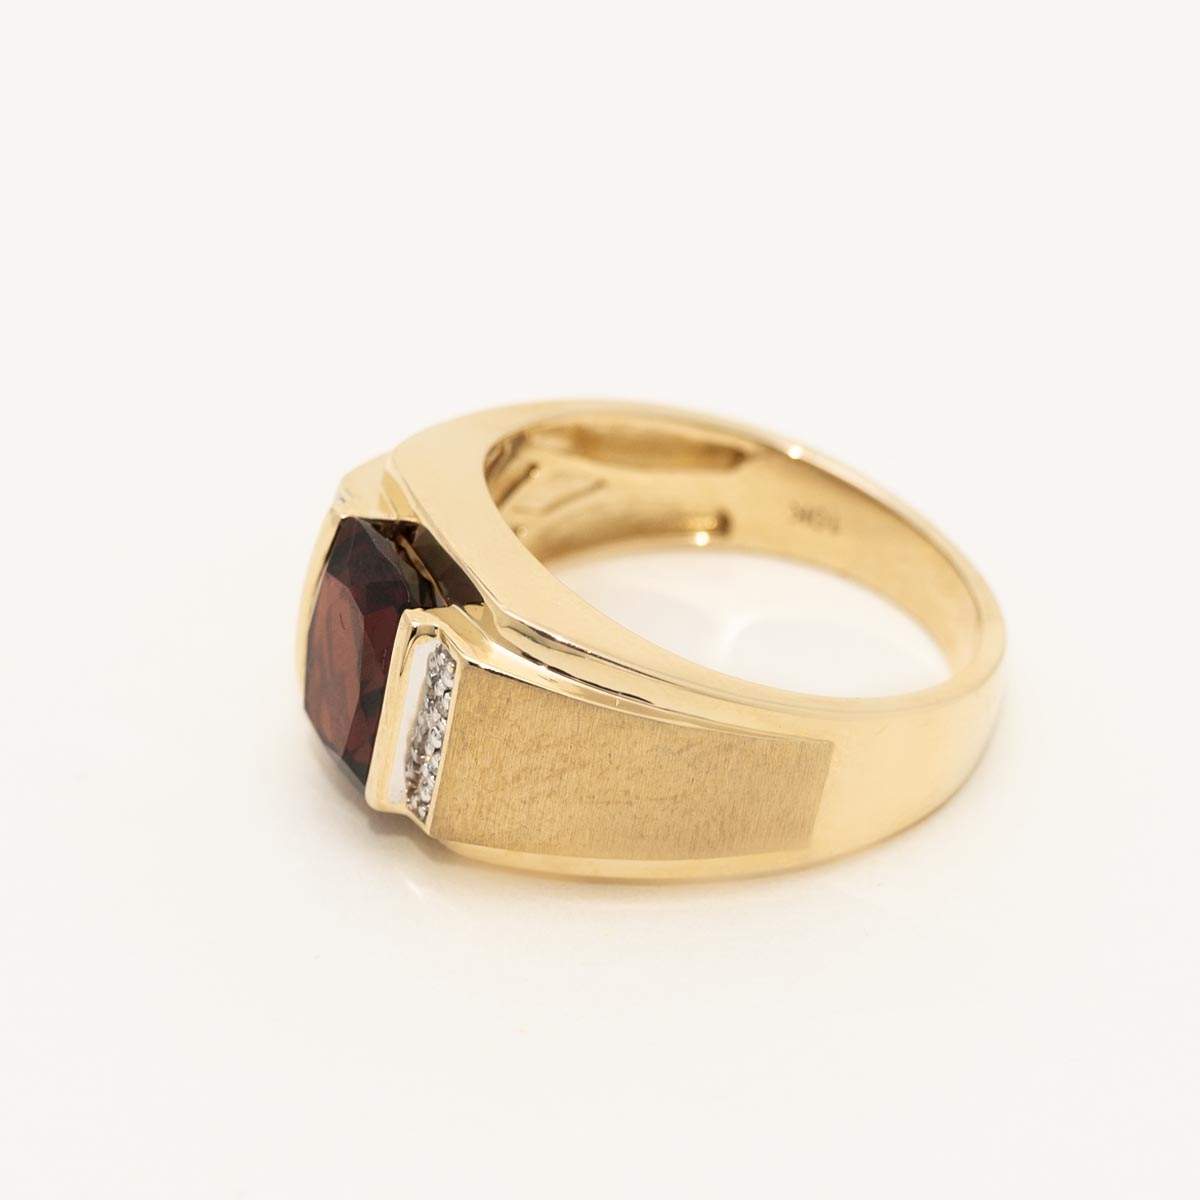 Mens Cushion Cut Garnet Ring in 10kt Yellow Gold with Diamonds